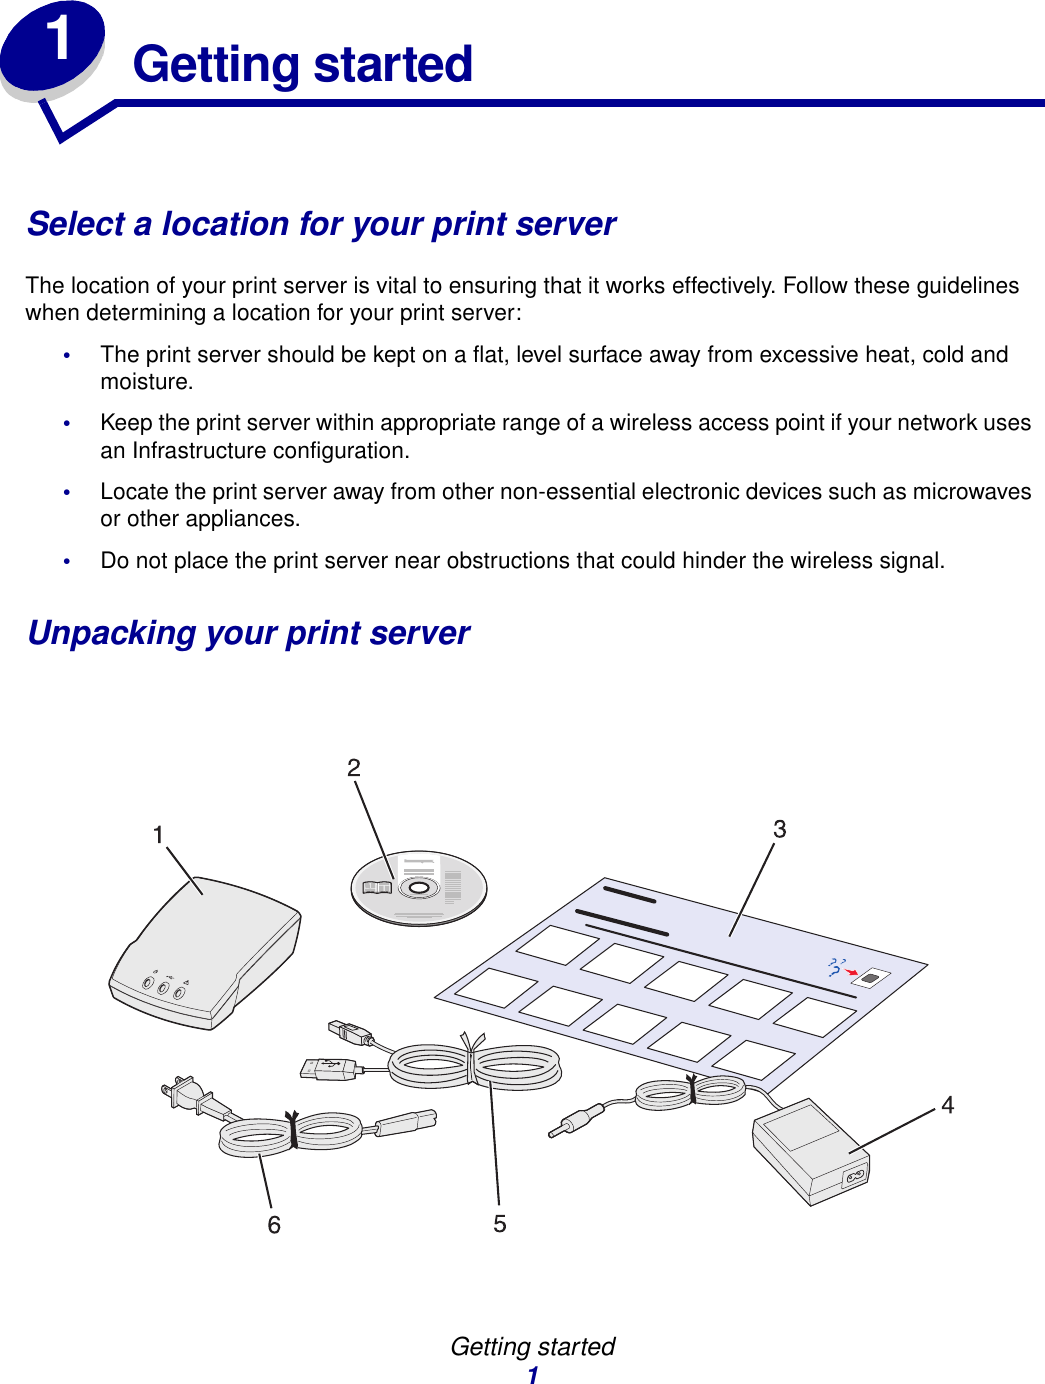 Getting started11Getting startedSelect a location for your print serverThe location of your print server is vital to ensuring that it works effectively. Follow these guidelines when determining a location for your print server:•The print server should be kept on a flat, level surface away from excessive heat, cold and moisture.•Keep the print server within appropriate range of a wireless access point if your network uses an Infrastructure configuration.•Locate the print server away from other non-essential electronic devices such as microwaves or other appliances. •Do not place the print server near obstructions that could hinder the wireless signal.Unpacking your print server